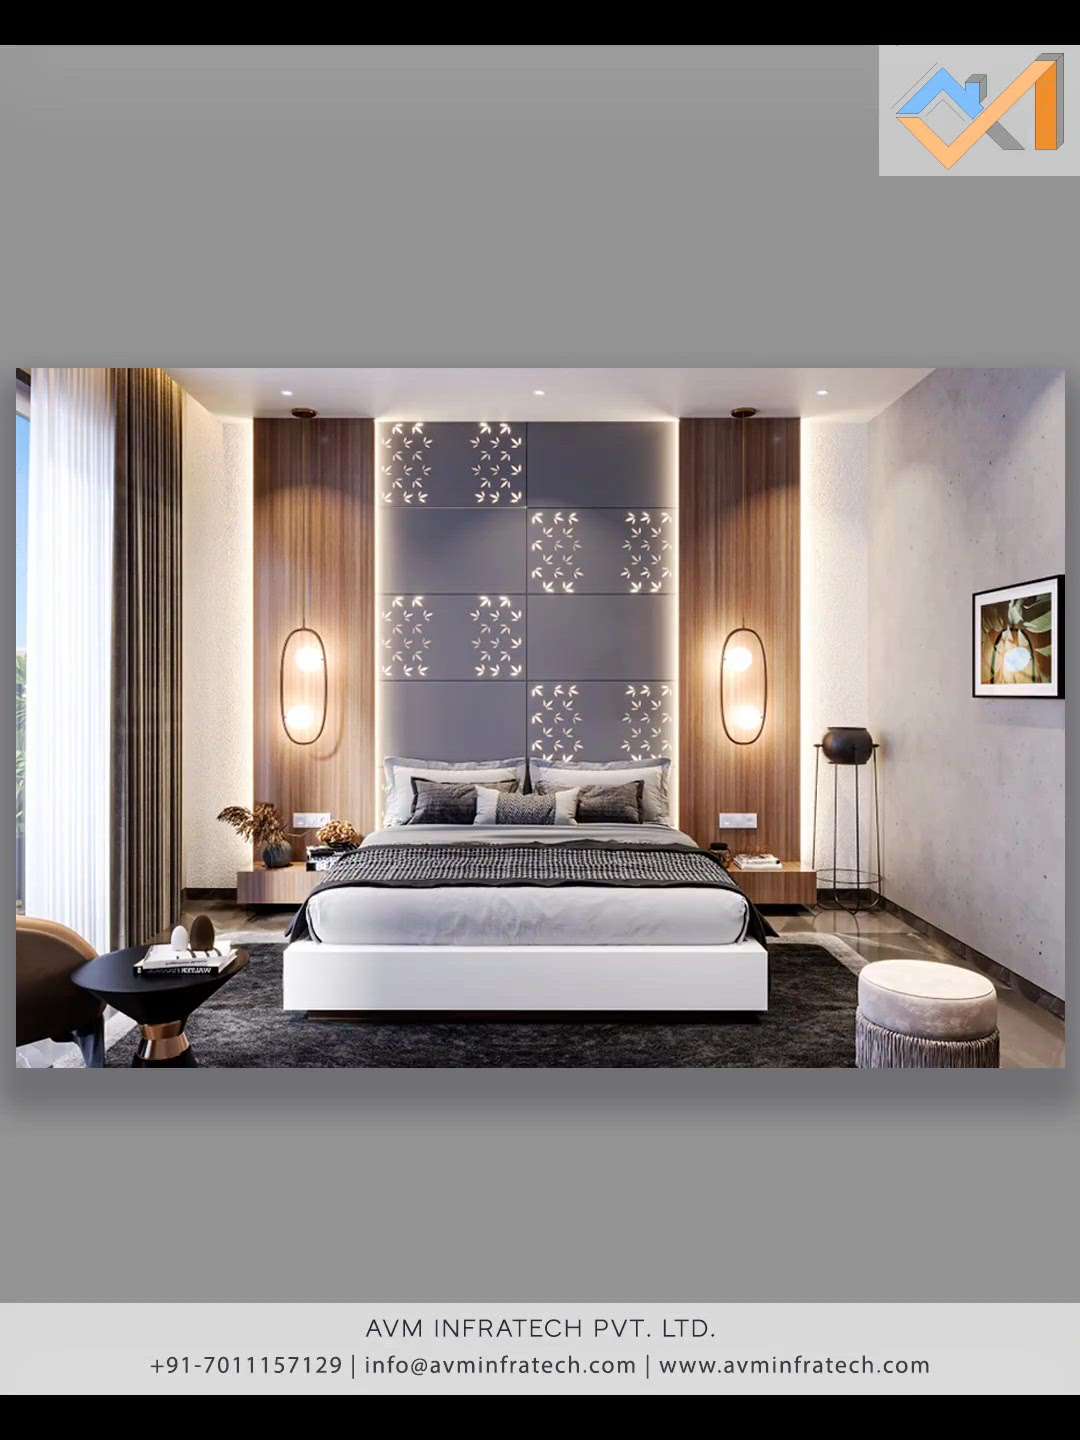 Modern-day bedroom panelling takes on a variety of shapes and colours and is often used on a feature wall to really showcase your bed.


Follow us for more such amazing updates.
.
.
#wall #wallpaper #wallart #walldecor #walldecoration #walldesign #wallpaint #wallpanelling #wallpanels #wallpanel #wallpaneling #avminfratech #bedroomdesign #bed #bedroominspo #bedroom #bedroominterior #bedroomdecoration #beds